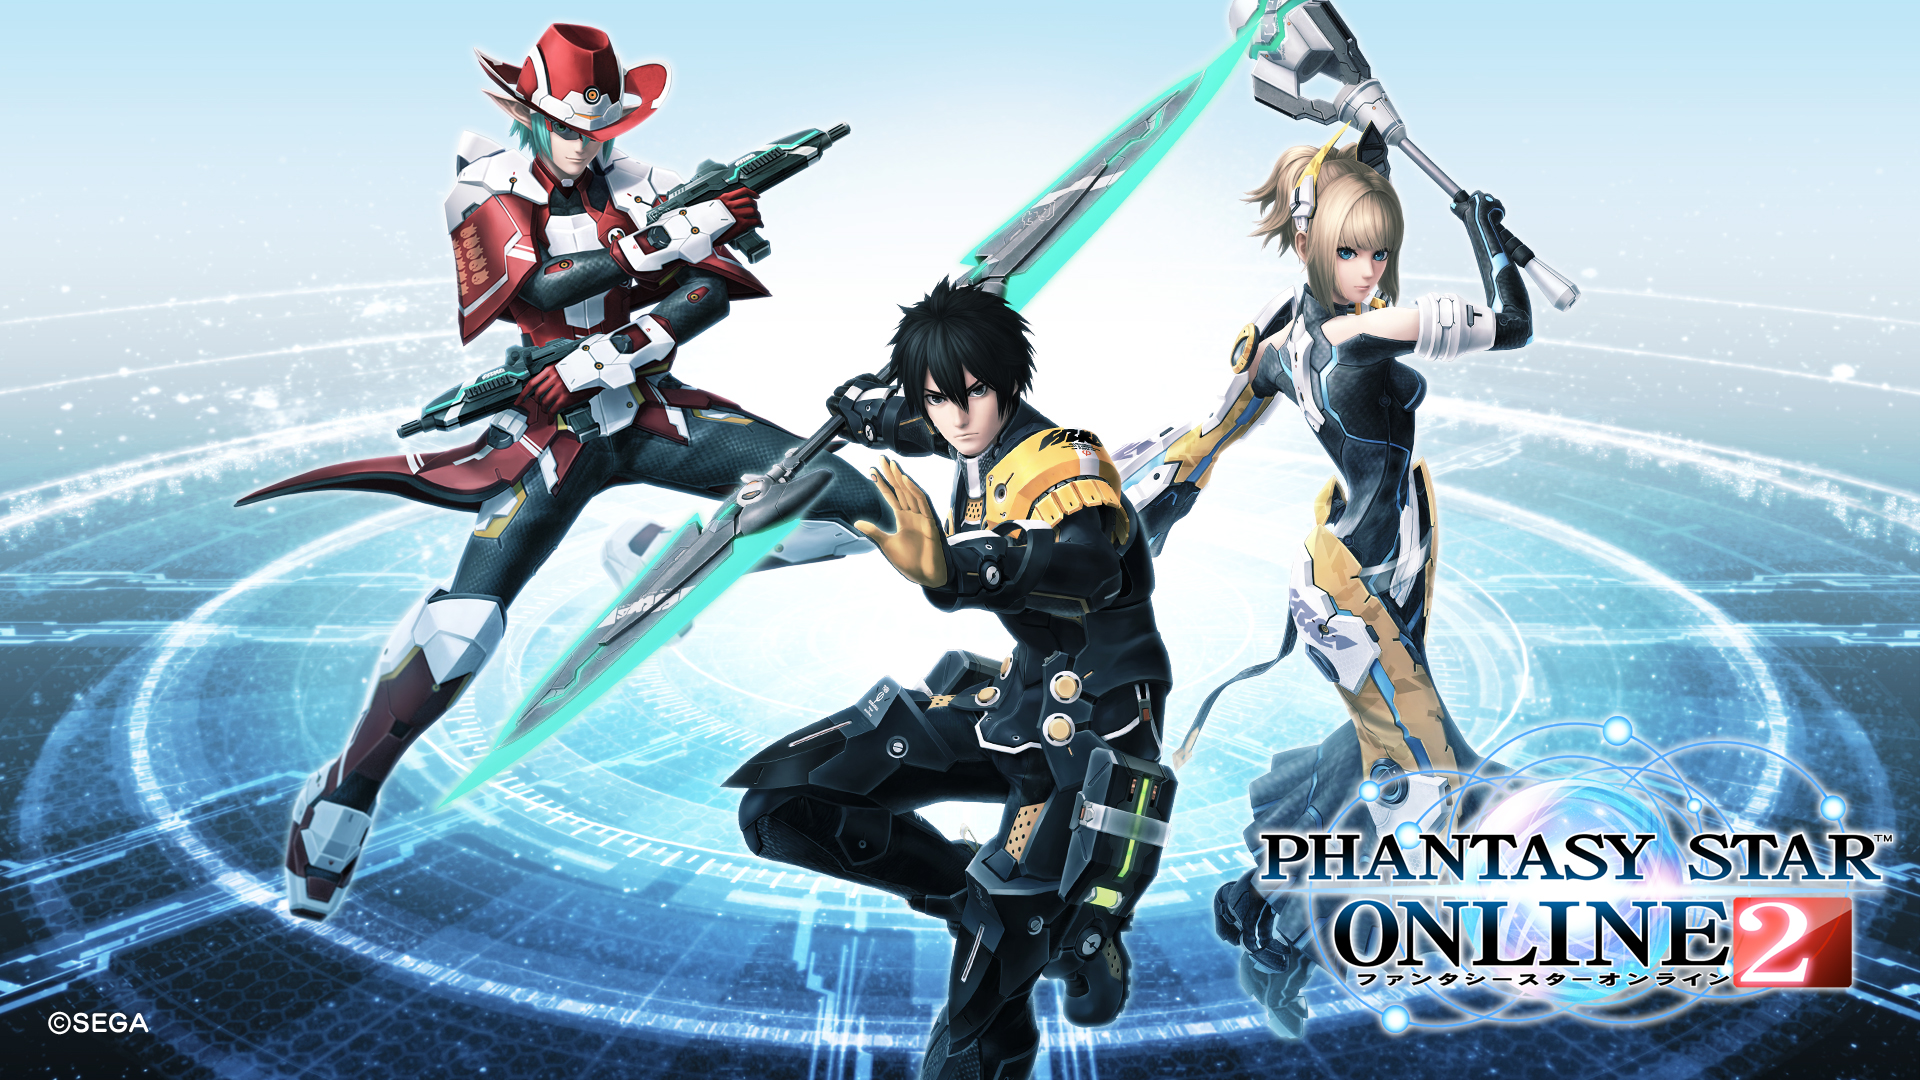 Amazing Phantasy Star Online 2 Pictures & Backgrounds